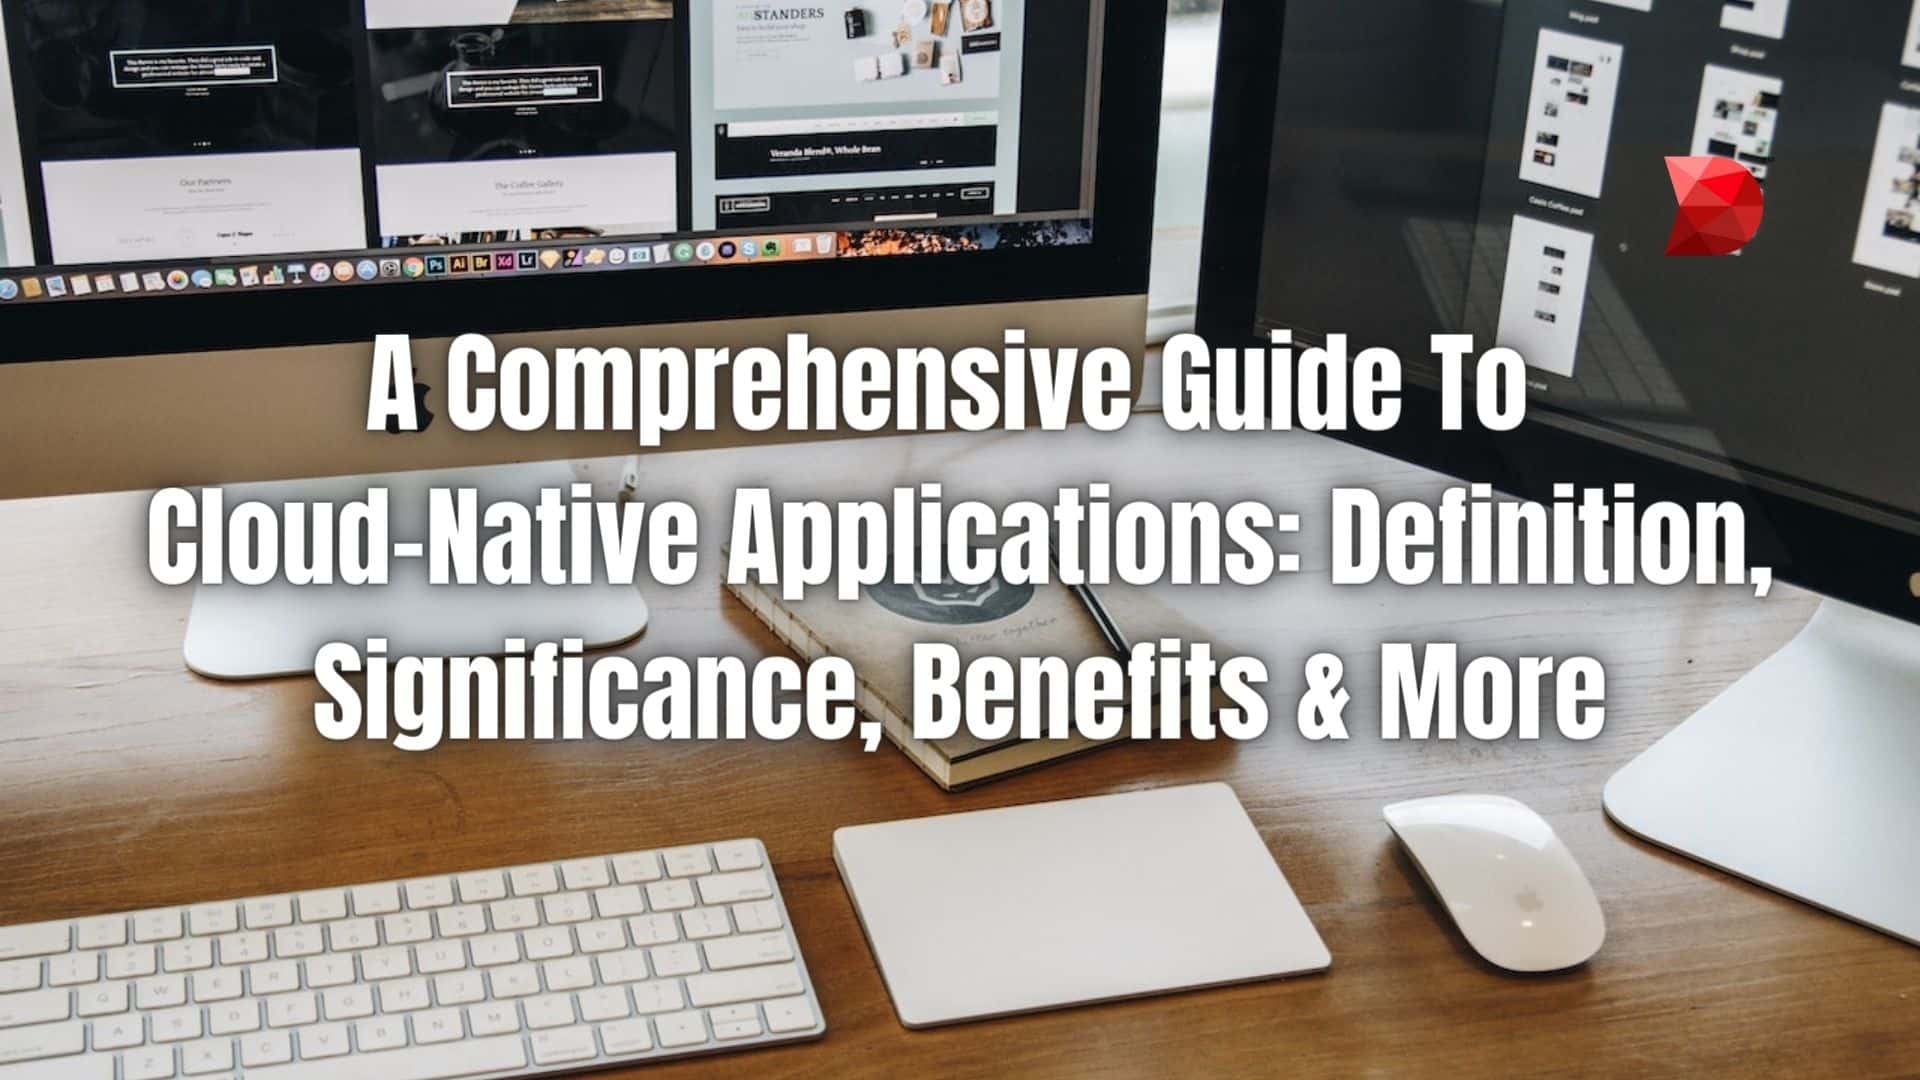 Comprehensive Guide To Cloud-Native Applications - DataMyte